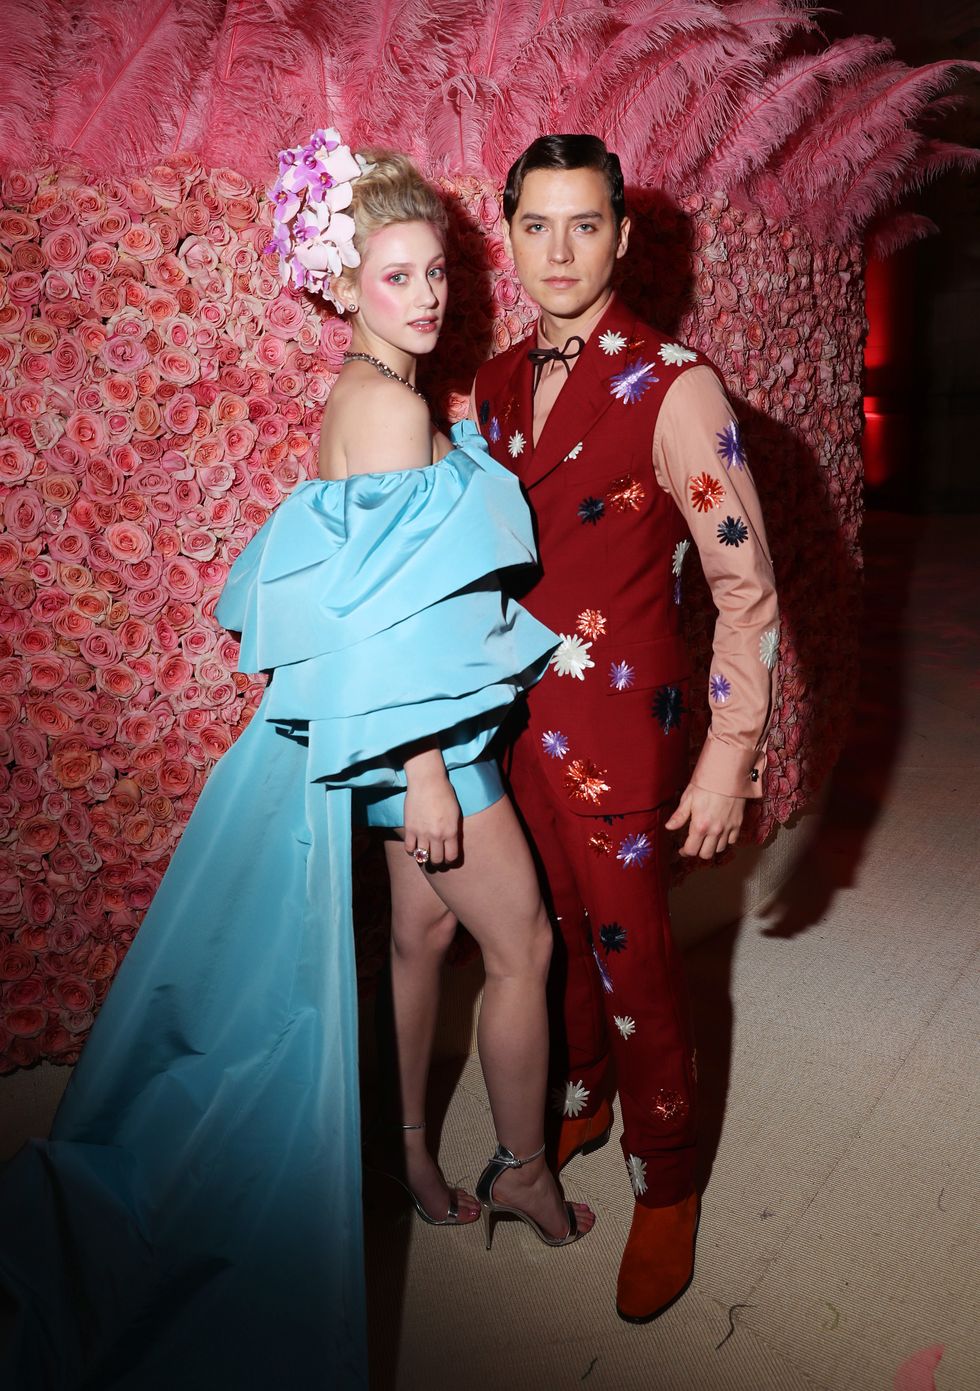 https://hips.hearstapps.com/hmg-prod.s3.amazonaws.com/images/lili-reinhart-and-cole-sprouse-attend-the-2019-met-gala-news-photo-1590436381.jpg?resize=980:*